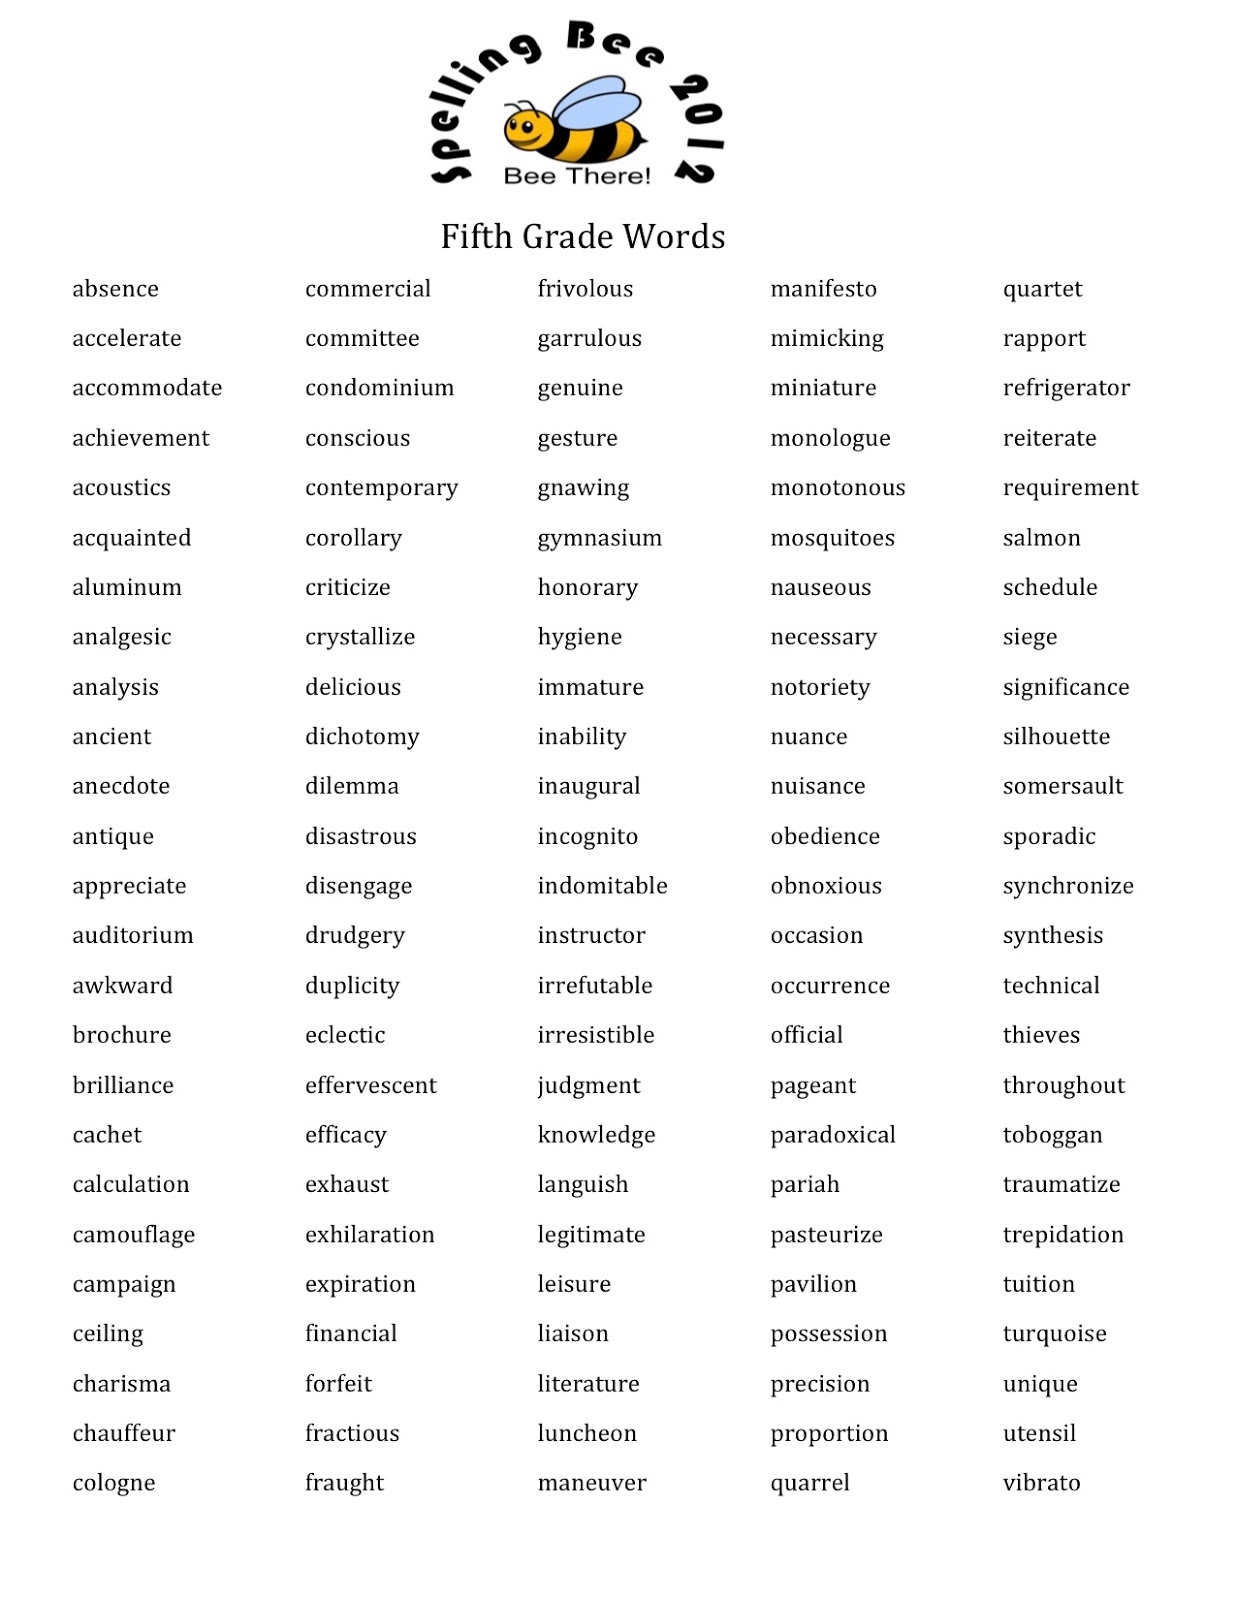 5th grade spelling lists by rule - StewartMagana's blog